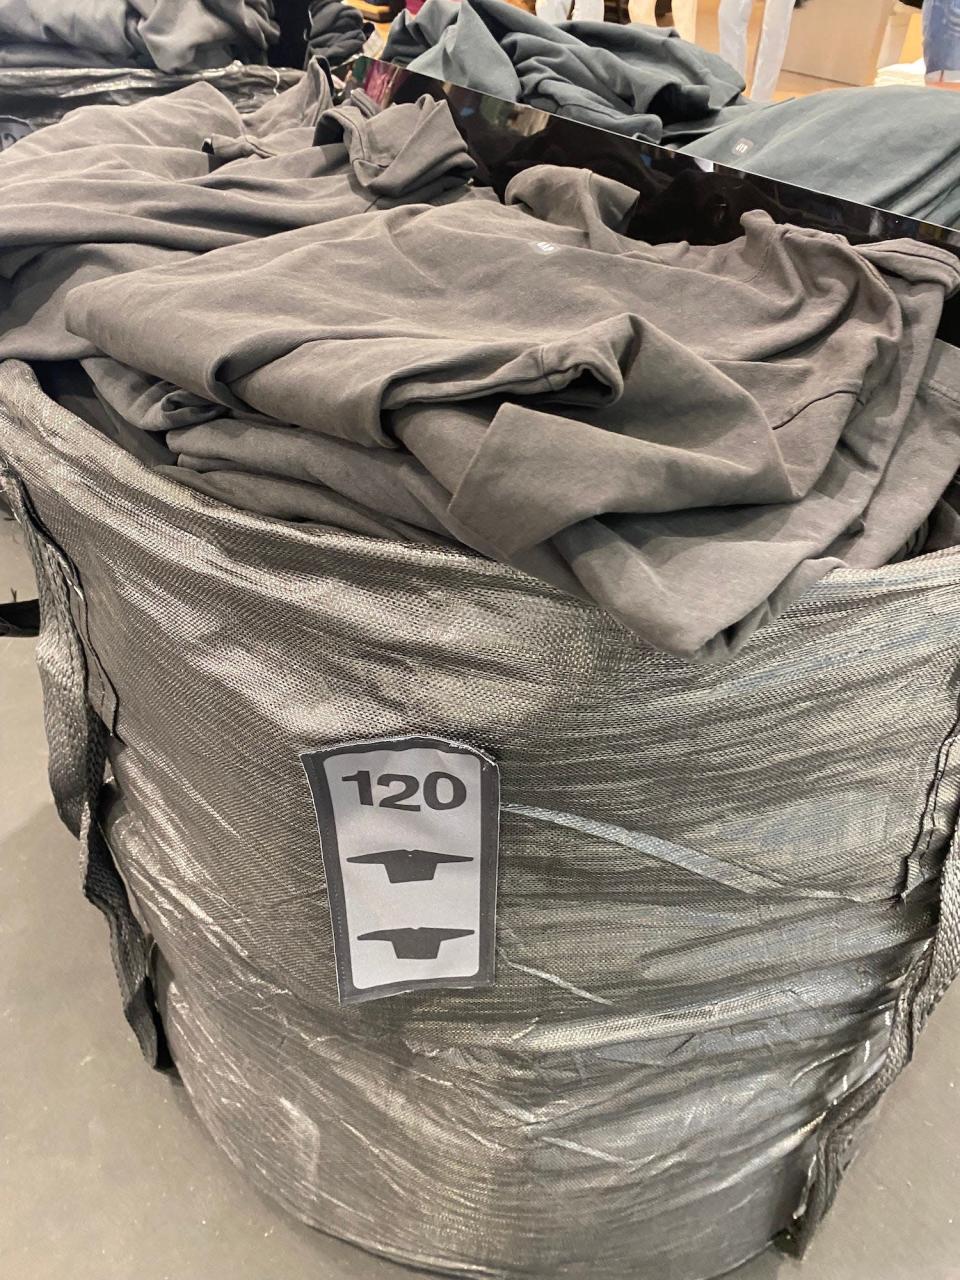 Yeezy x Gap shirts at a New Jersey store on August 17, 2022.